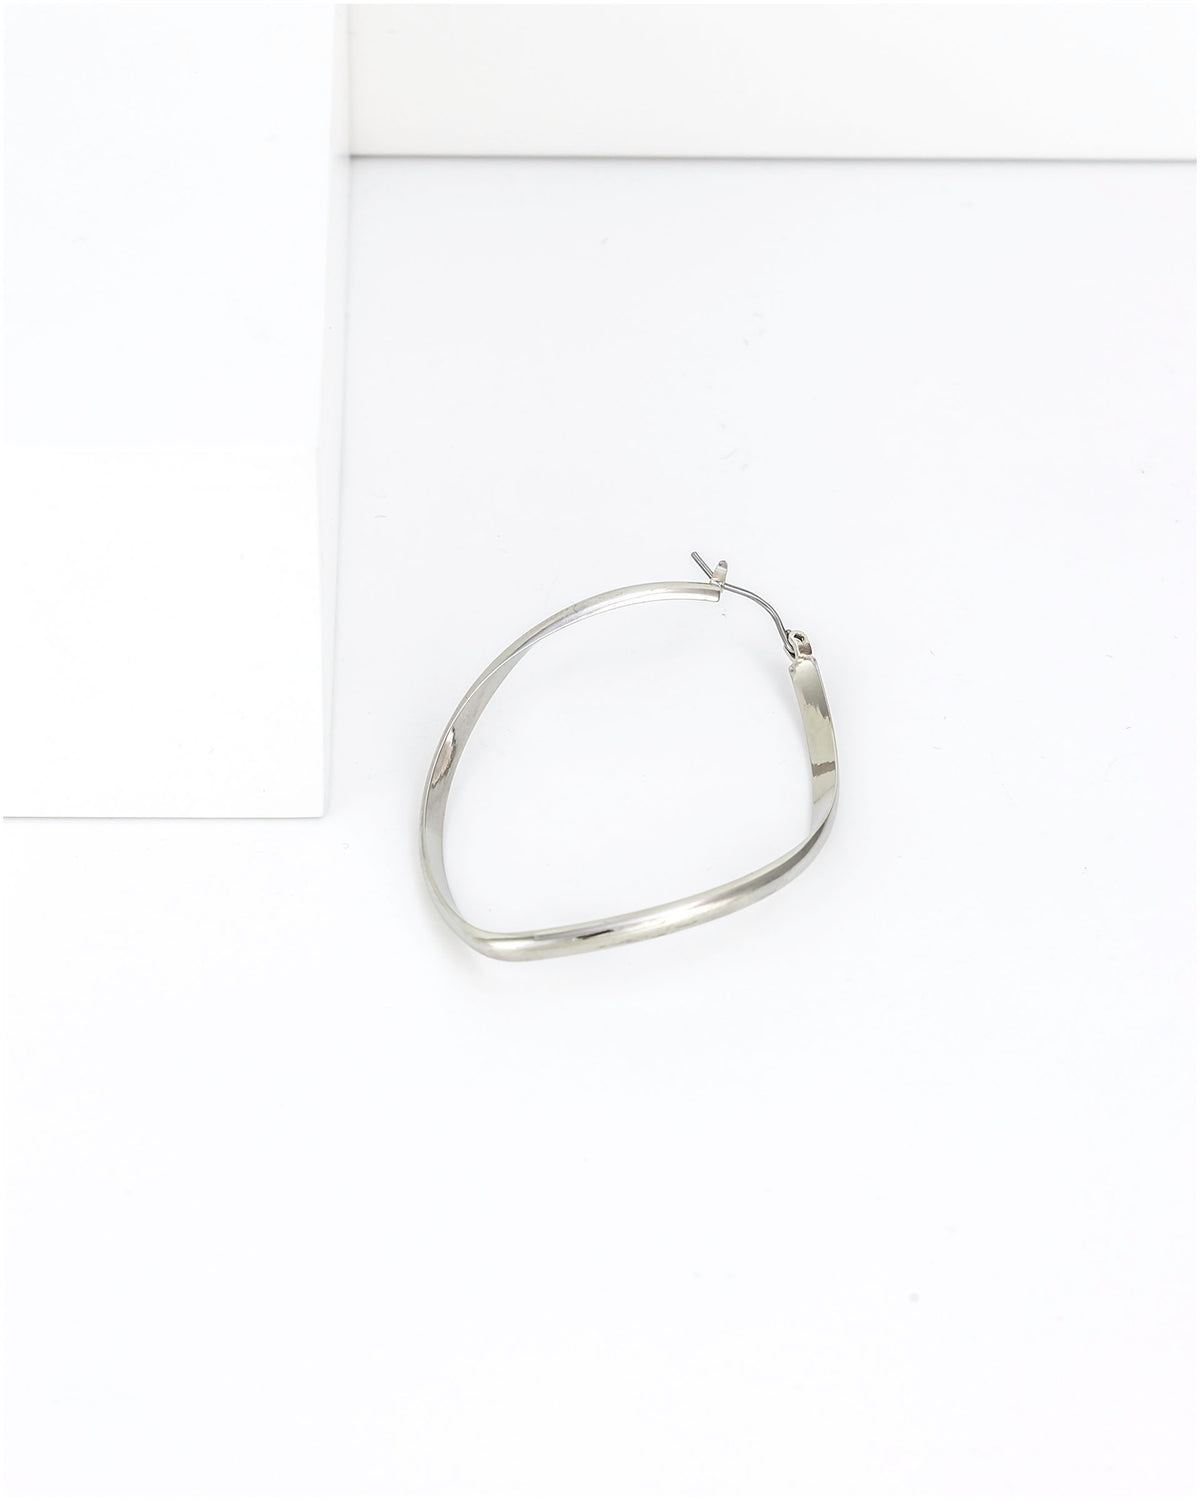 Dauplaise Jewelry - Obrit Opulence Hoops